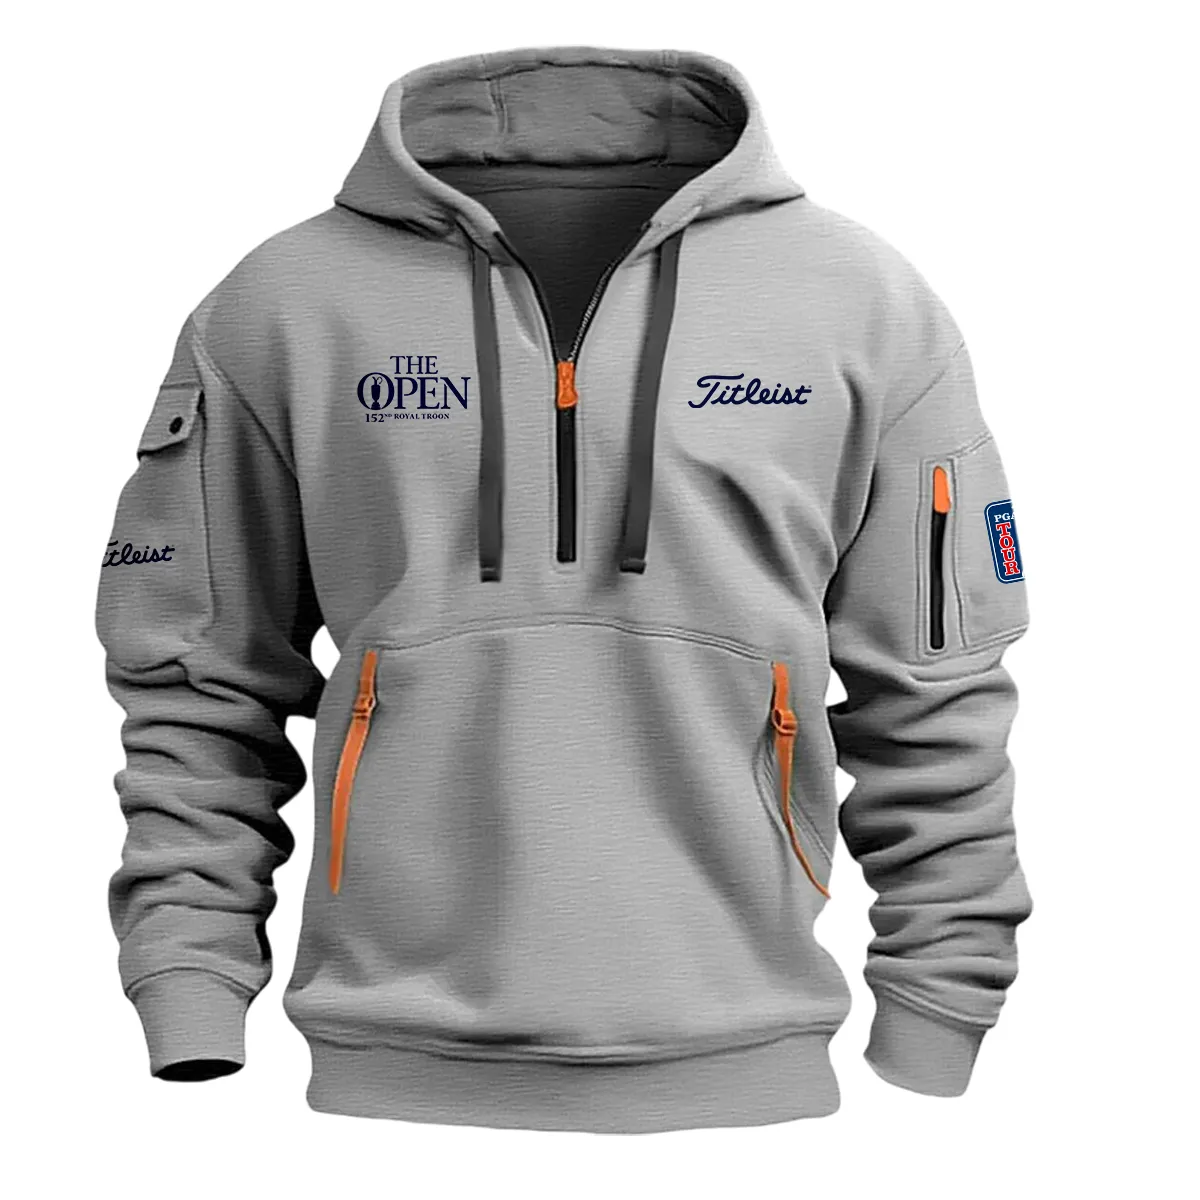 Gray Color Titleist Fashion Hoodie Half Zipper 152nd The Open Championship Gift For Fans